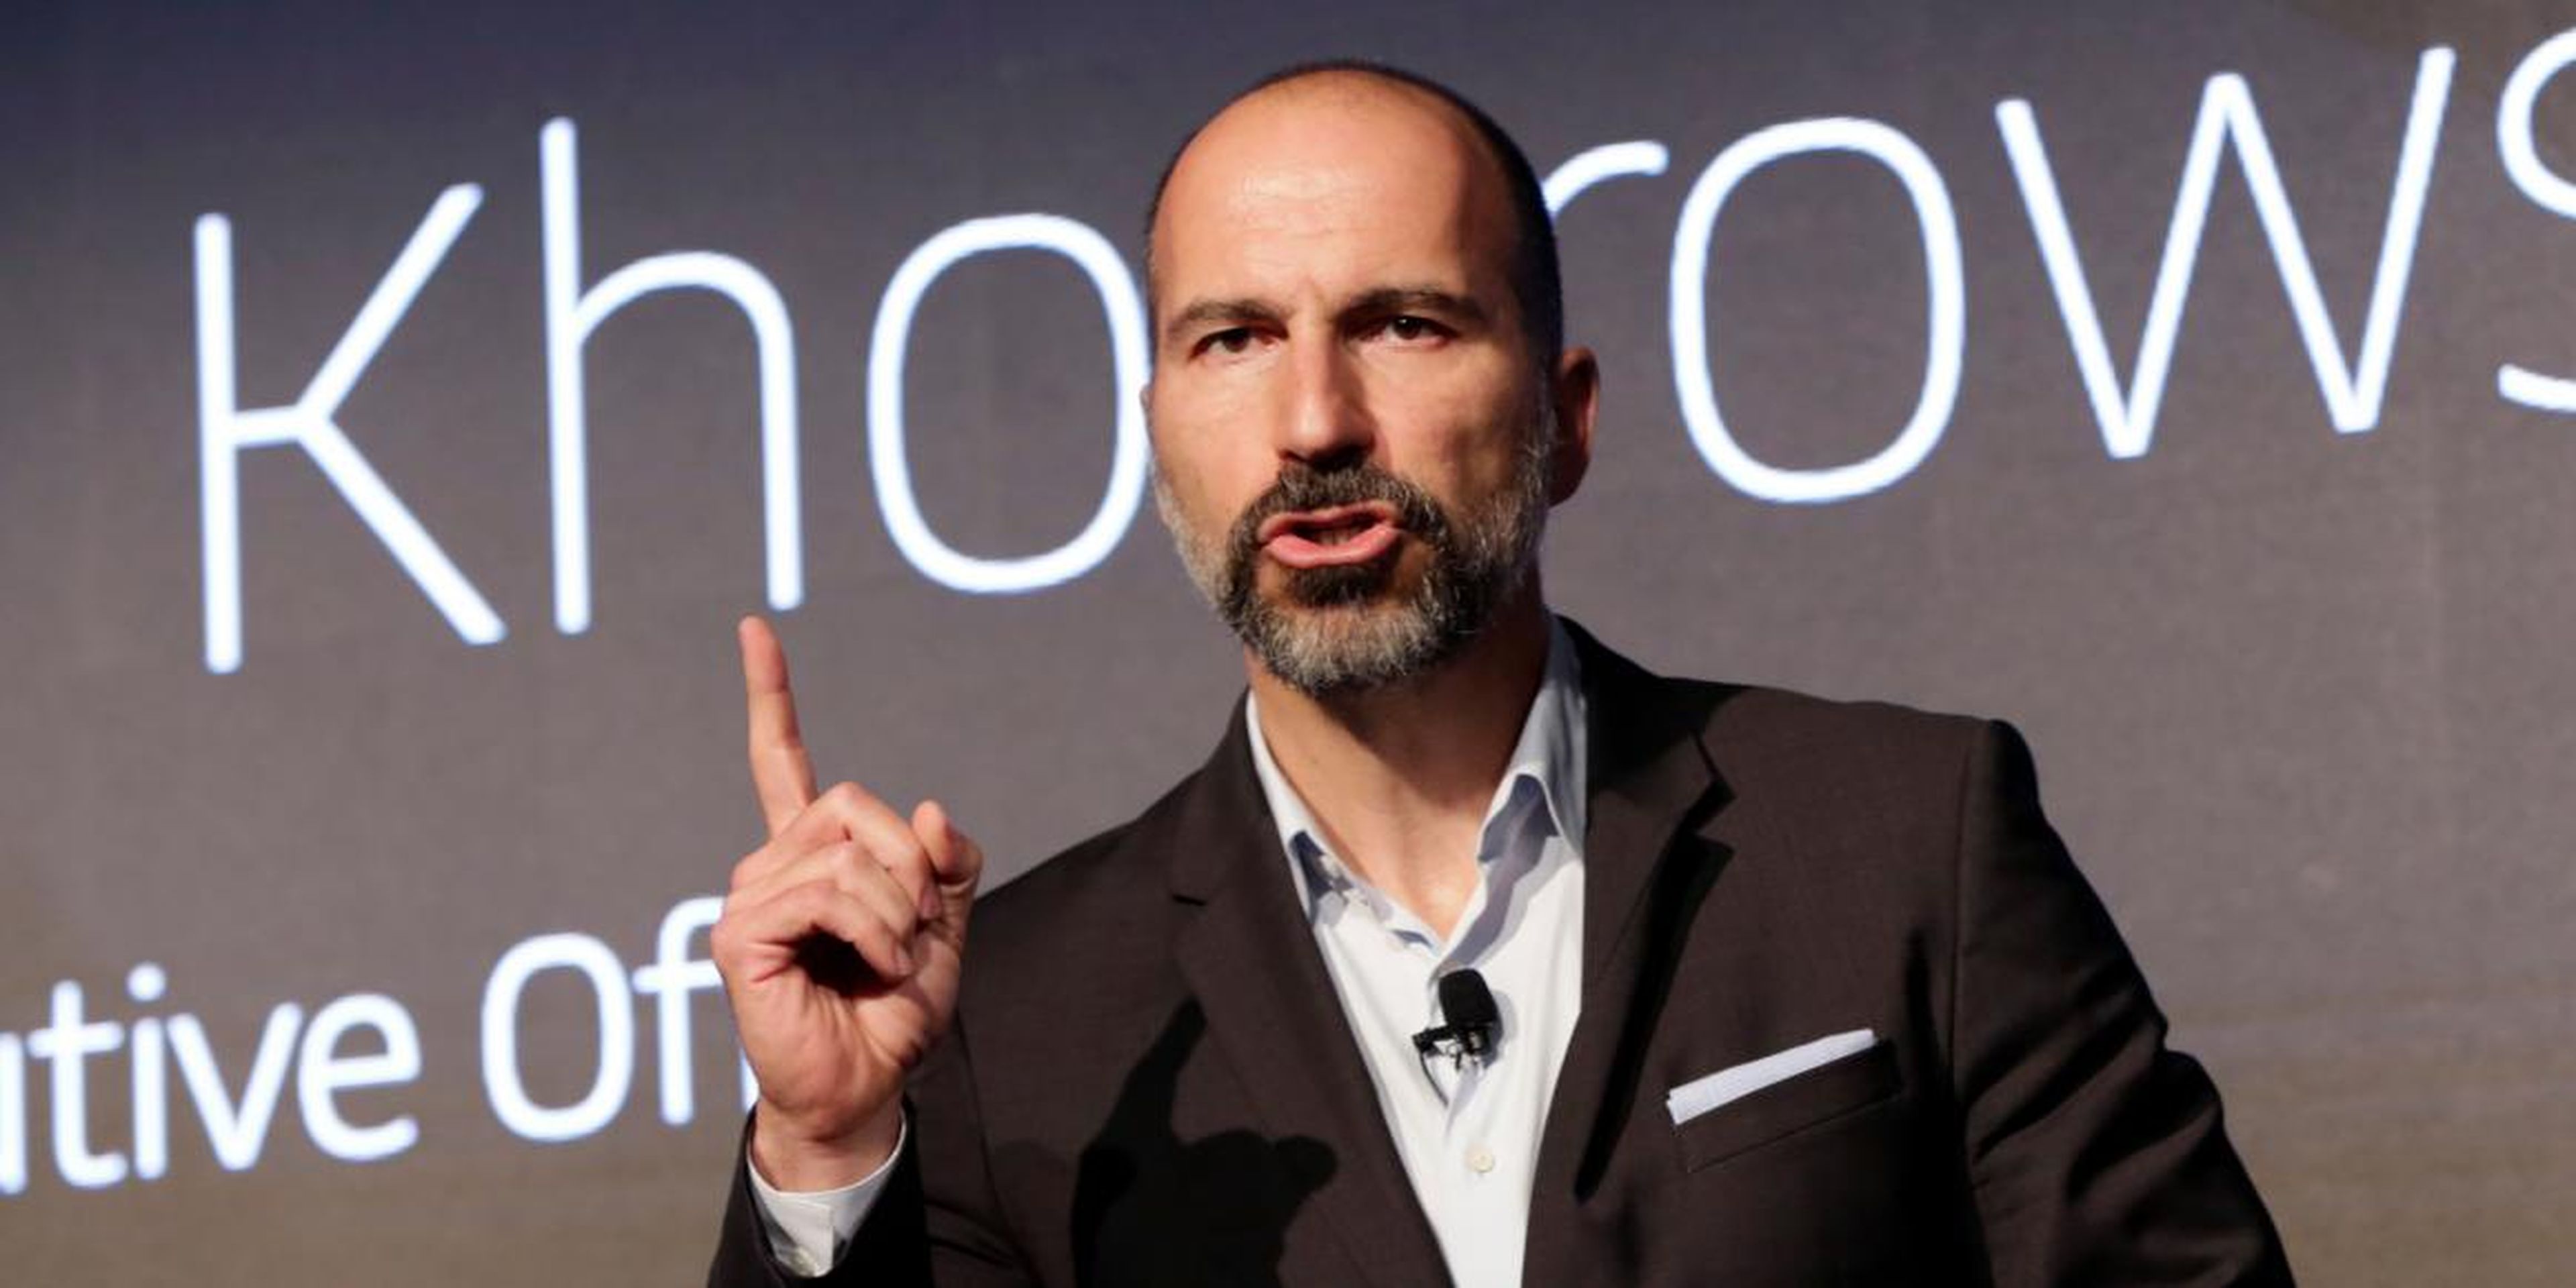 Uber CEO Dara Khosrowshahi speaks during the company's unveiling of the new features in New York, Wednesday, Sept. 5, 2018.